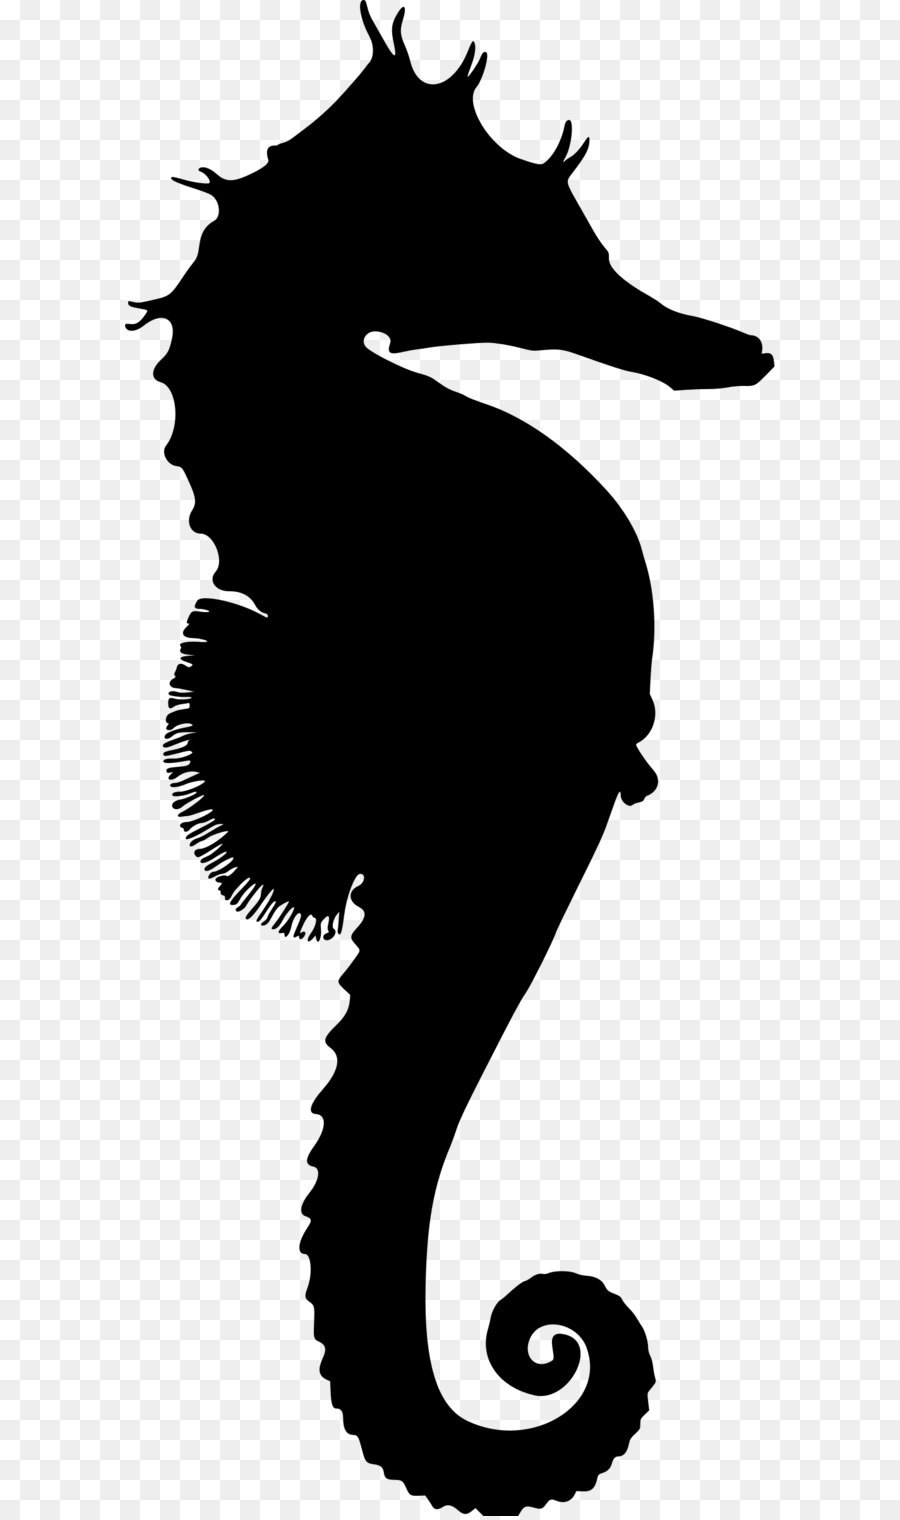 Silhouette Great seahorse New Holland seahorse Clip art - Seahorse PNG png download - 1029*2400 - Free Transparent Silhouette png Download.